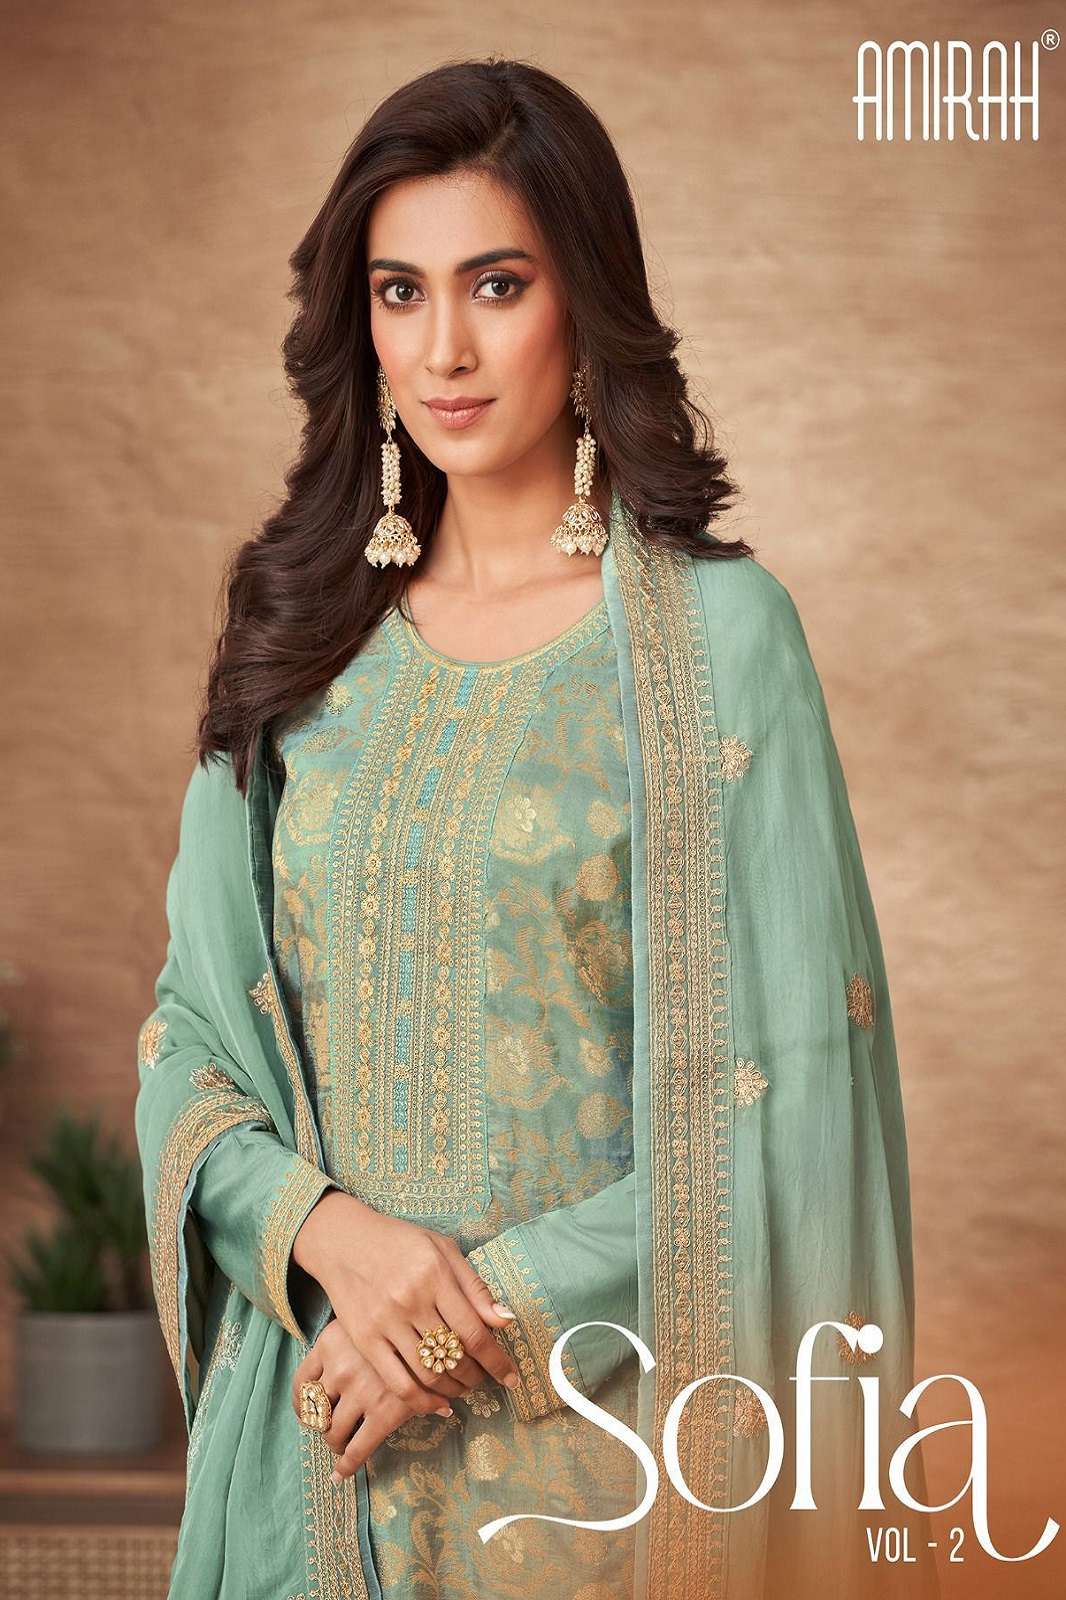 Amirah Sofia Vol-2 Traditional Designer Woman Party Function & Festival Wear Salwar Suit Collection